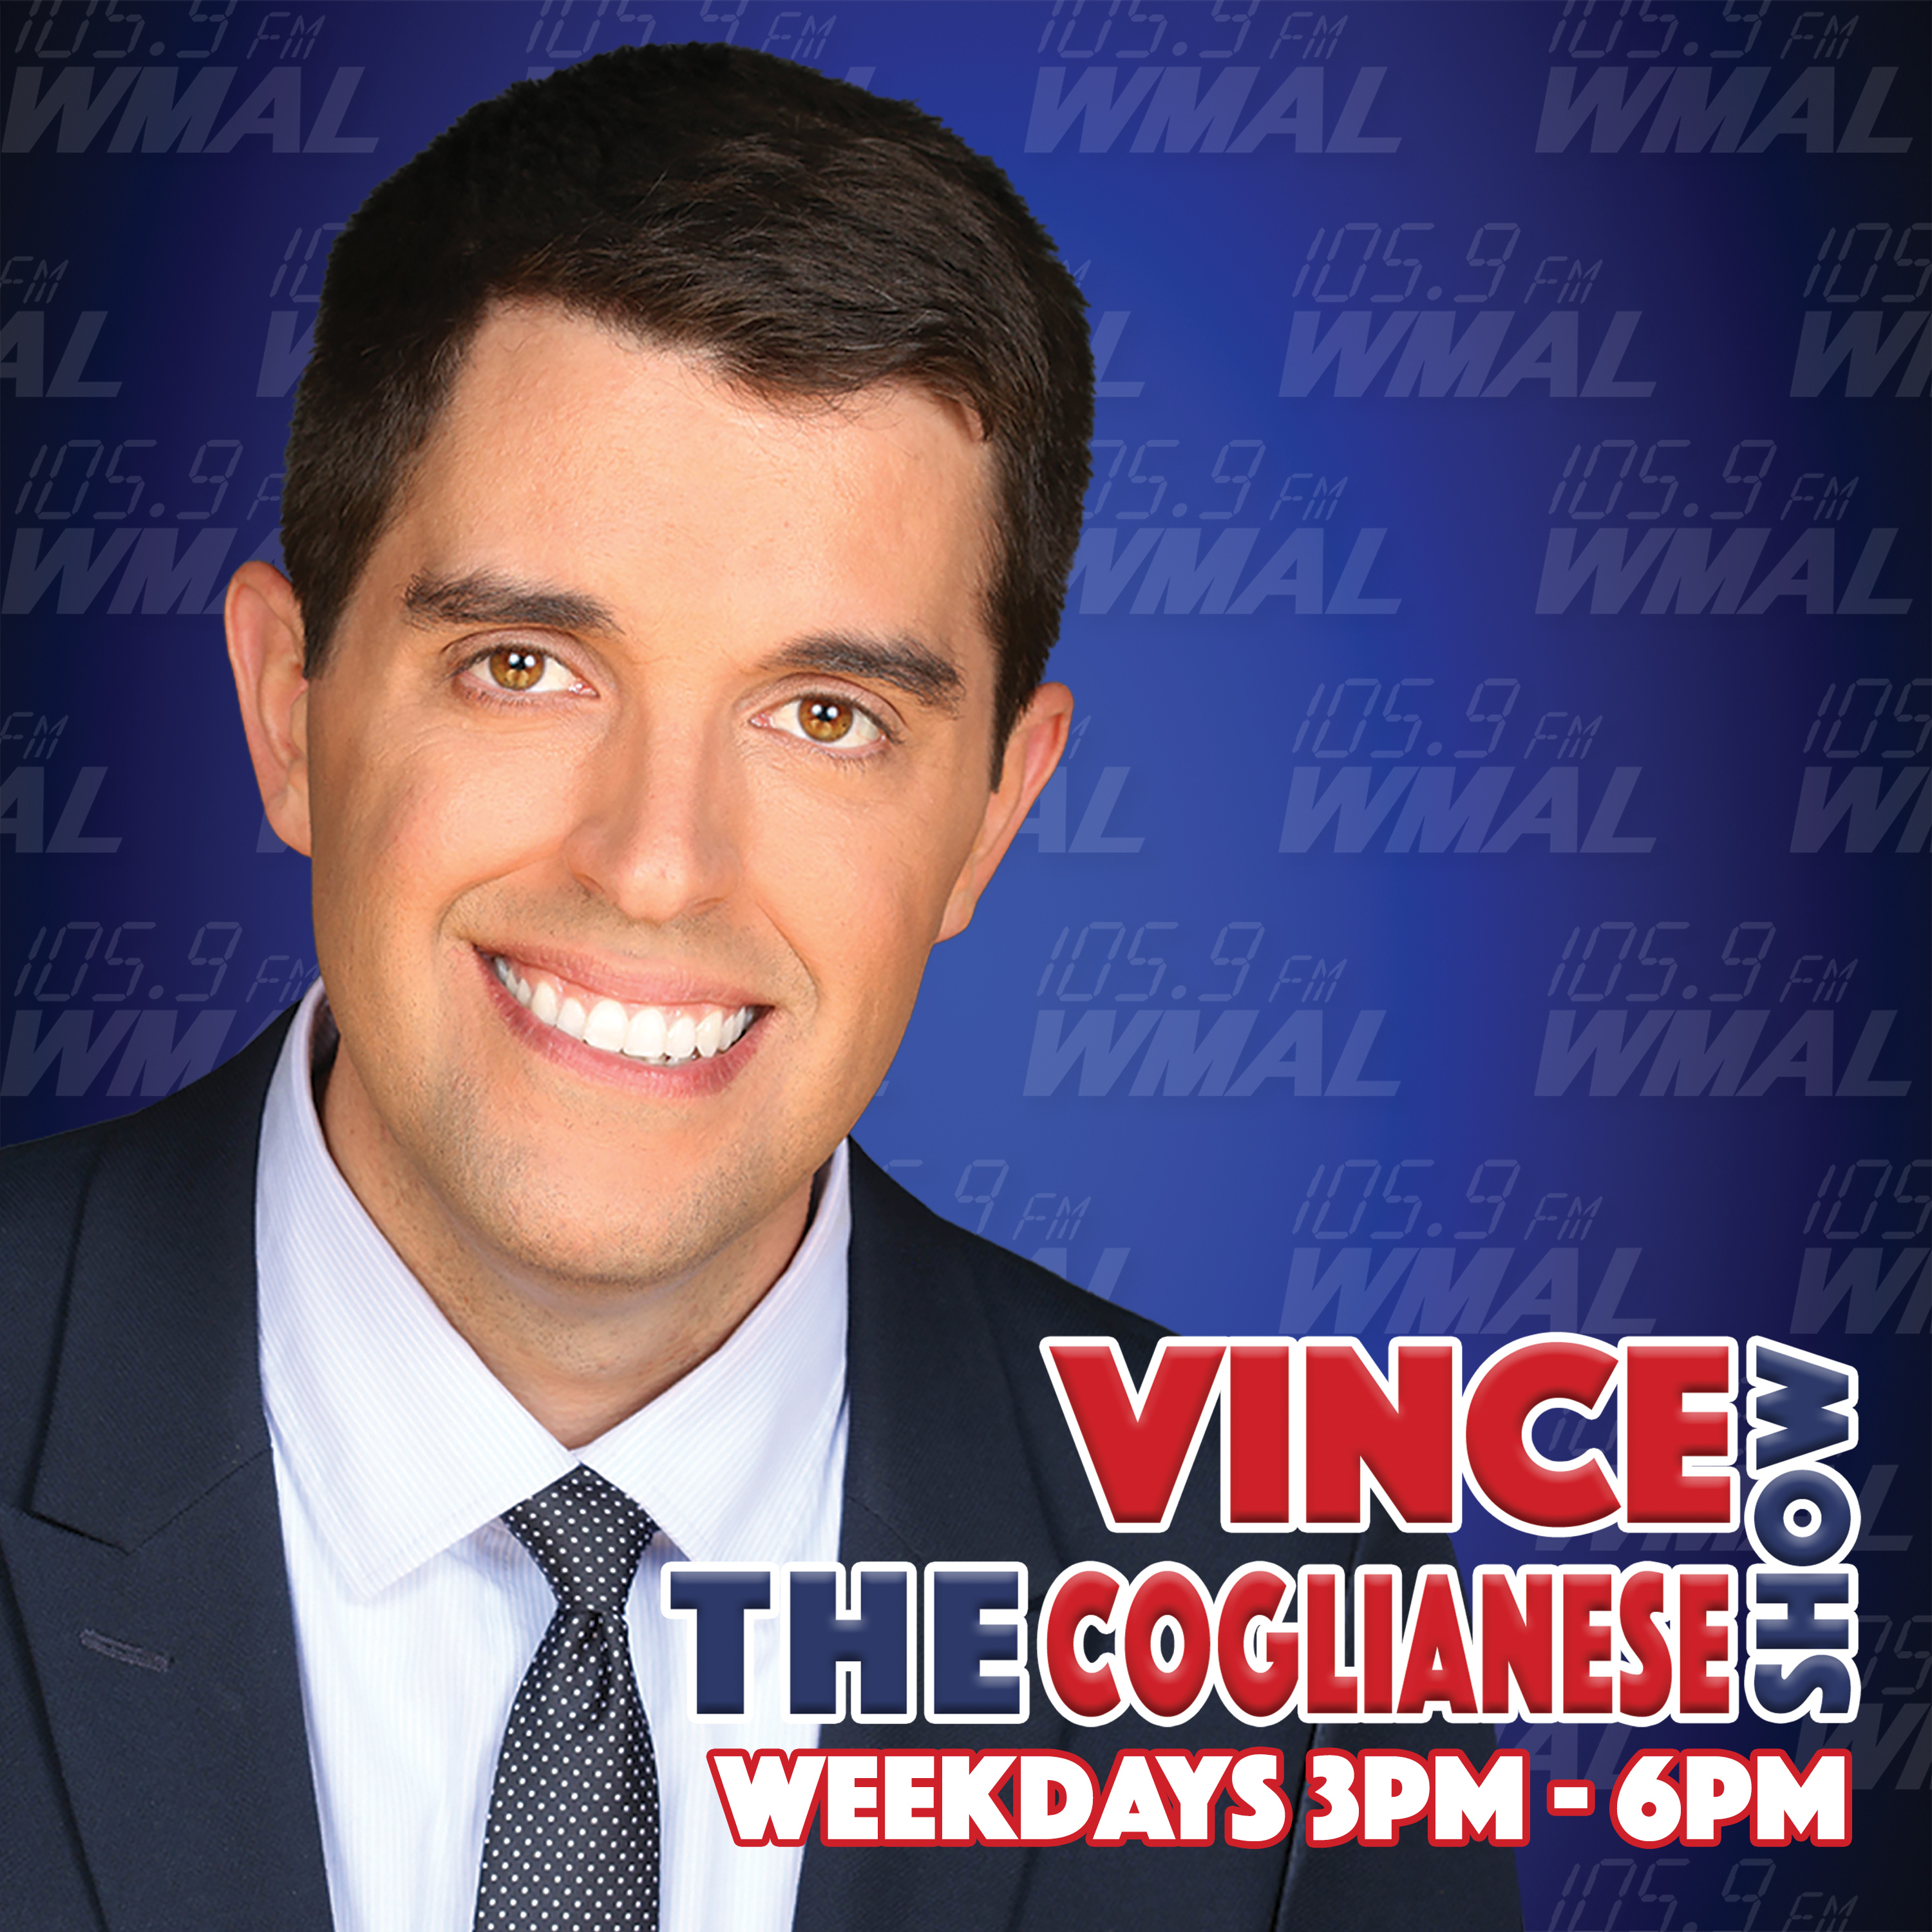 WORTH LISTENING TO: Dr. John Lott and Nikki Goeser with Vince Coglianese on WMAL: To Discuss Their Testimonies State Legislatures